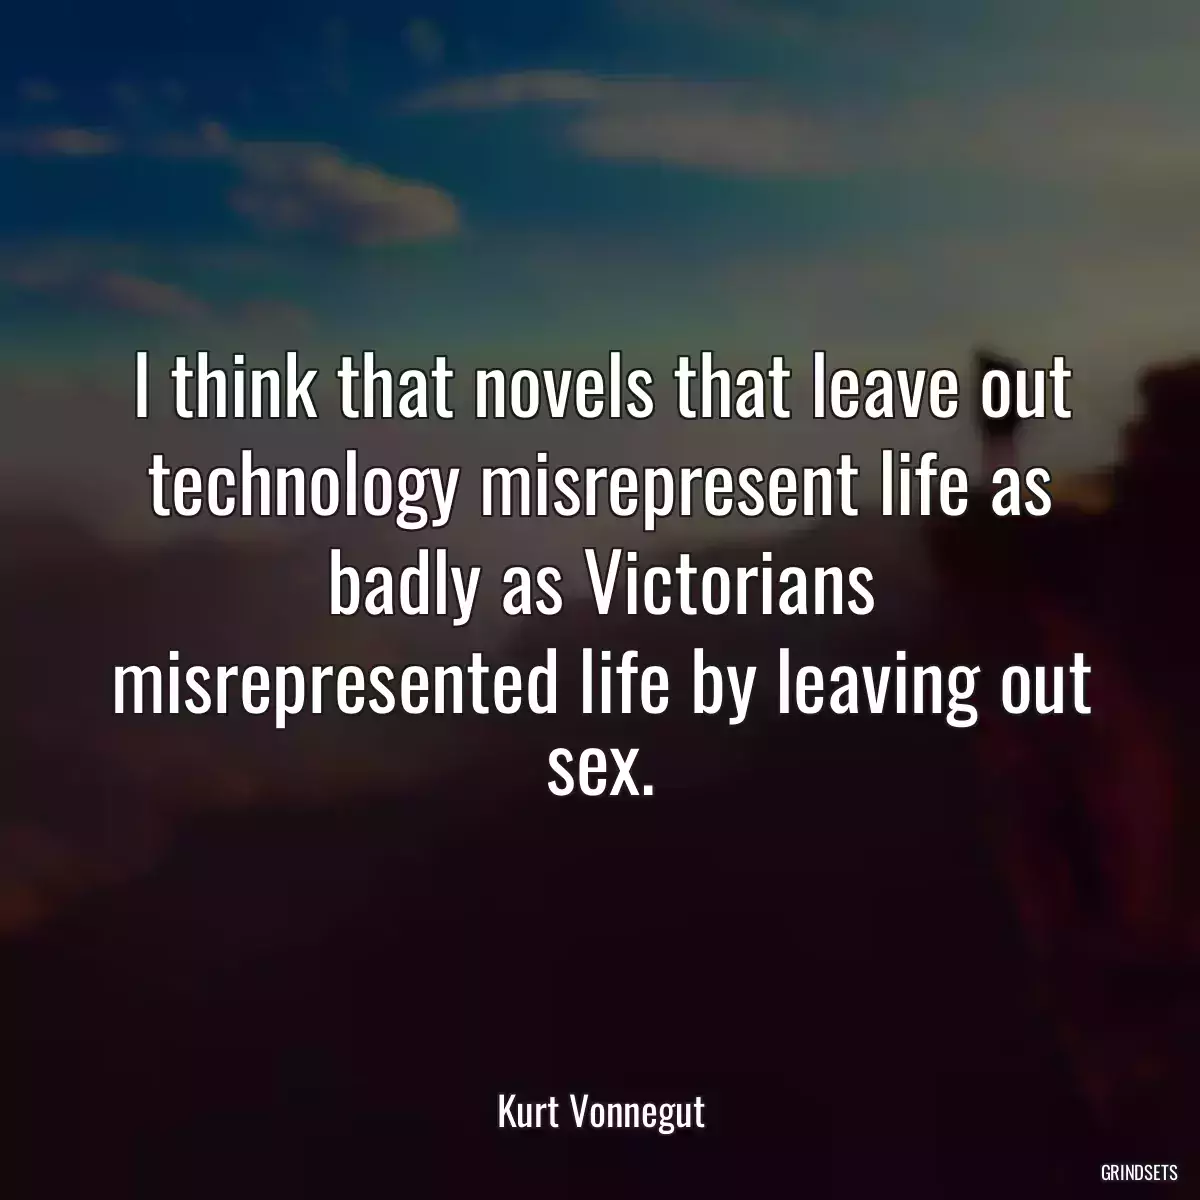 I think that novels that leave out technology misrepresent life as badly as Victorians misrepresented life by leaving out sex.